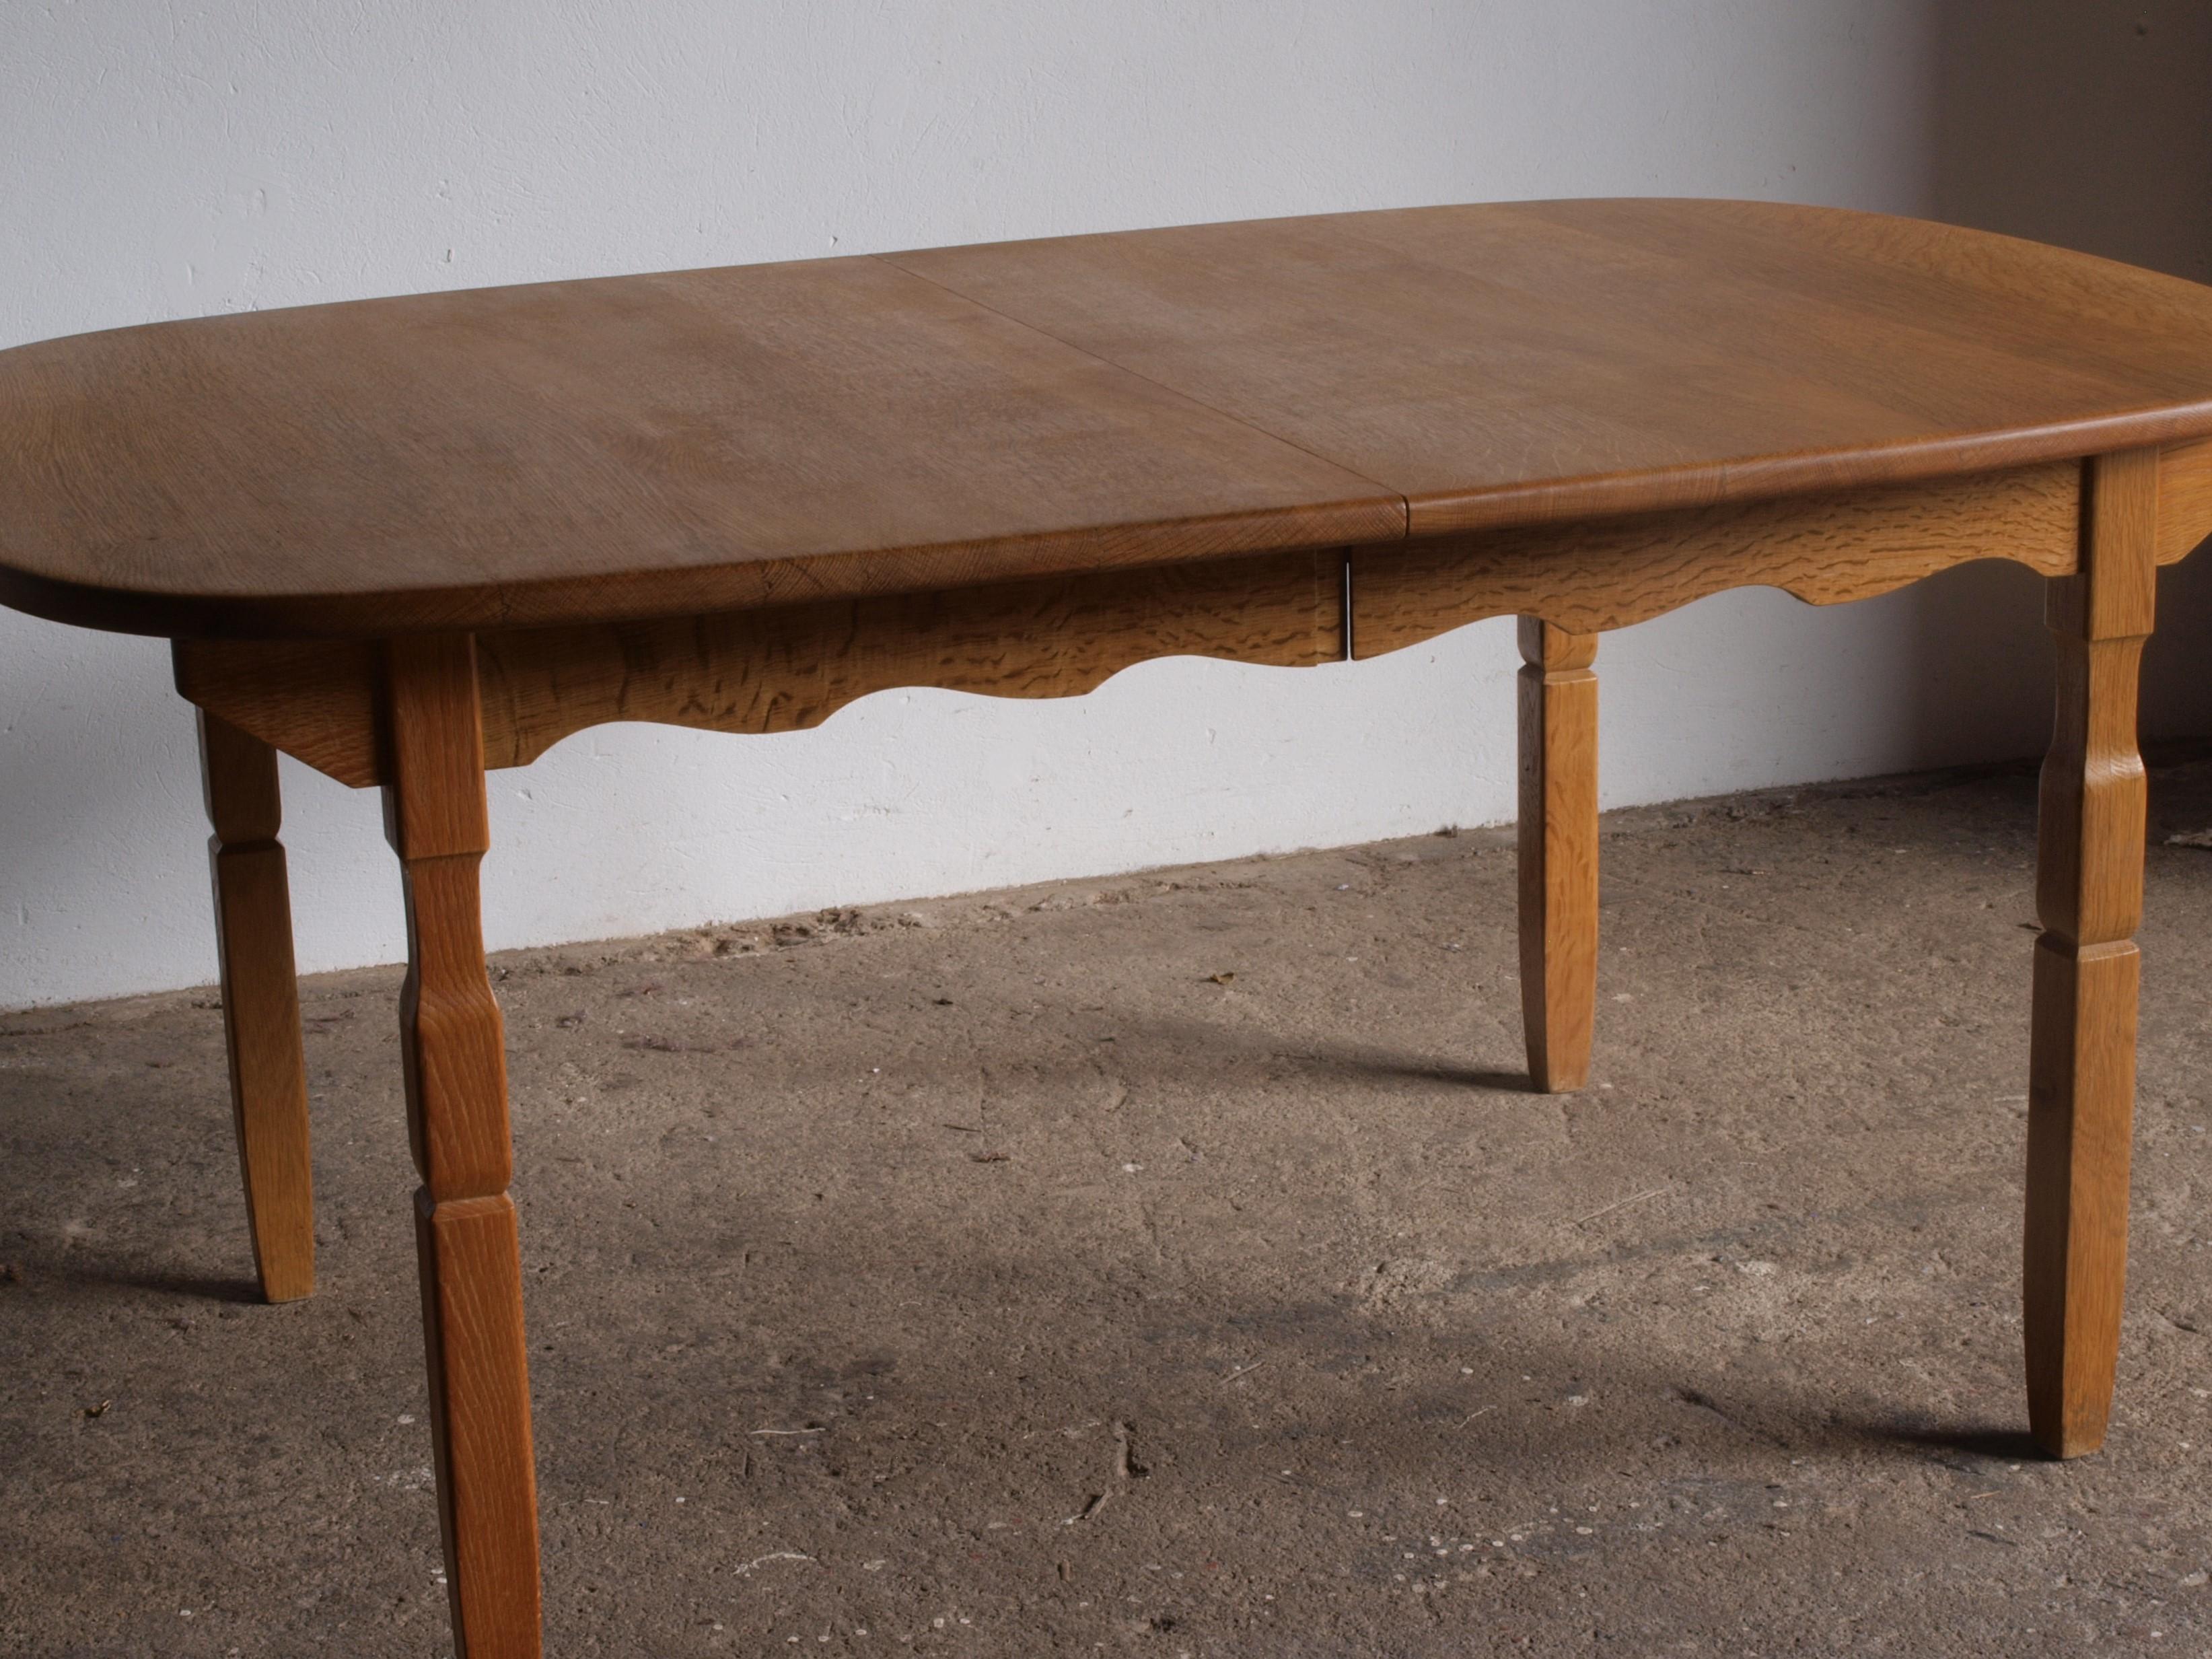 This vintage oak table shares the essence of Kjaernulf's furniture design. Its brutalist aesthetic, highlighted by intricate leg carvings, is beautifully balanced by its rounded shape. In excellent condition and gliding smoothly, it exudes